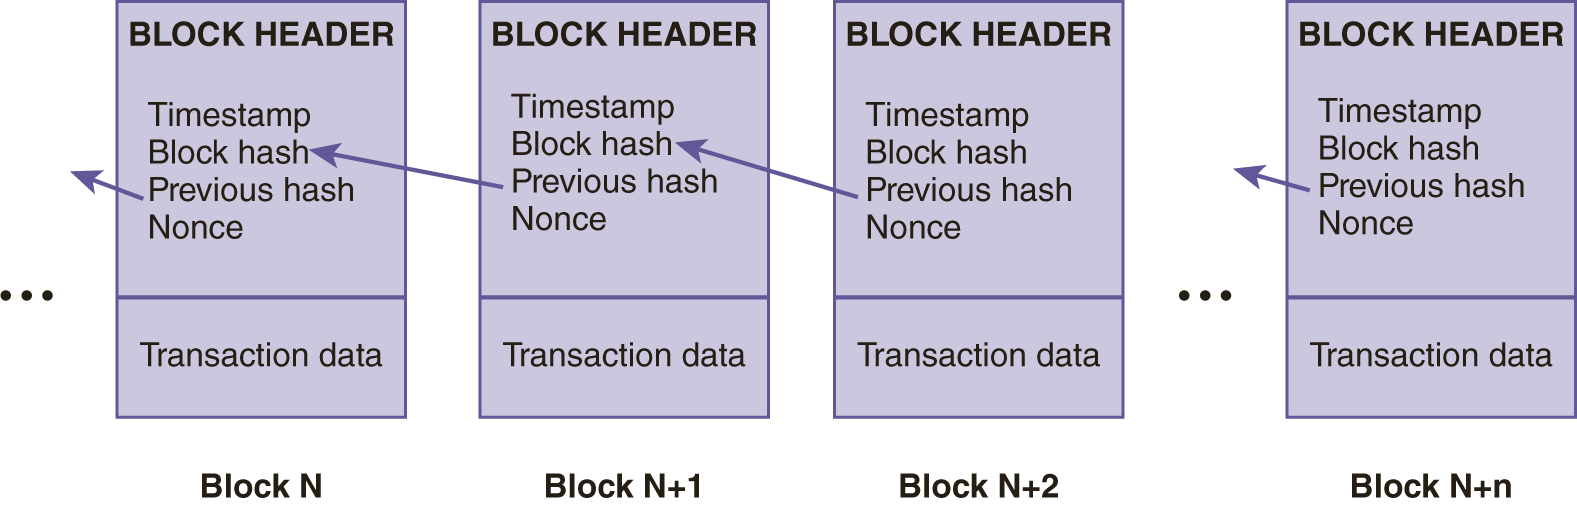 4 blocks are shown in the diagram. The block labels are N, N plus 1, N plus 2, and so on till N plus lowercase n. Each block has a block header and Transaction data. The components of the block header are Timestamp, Block hash, previous hash, and Nonce. An arrow is drawn from the Previous has of each block to the Block hash of the preceding block. 